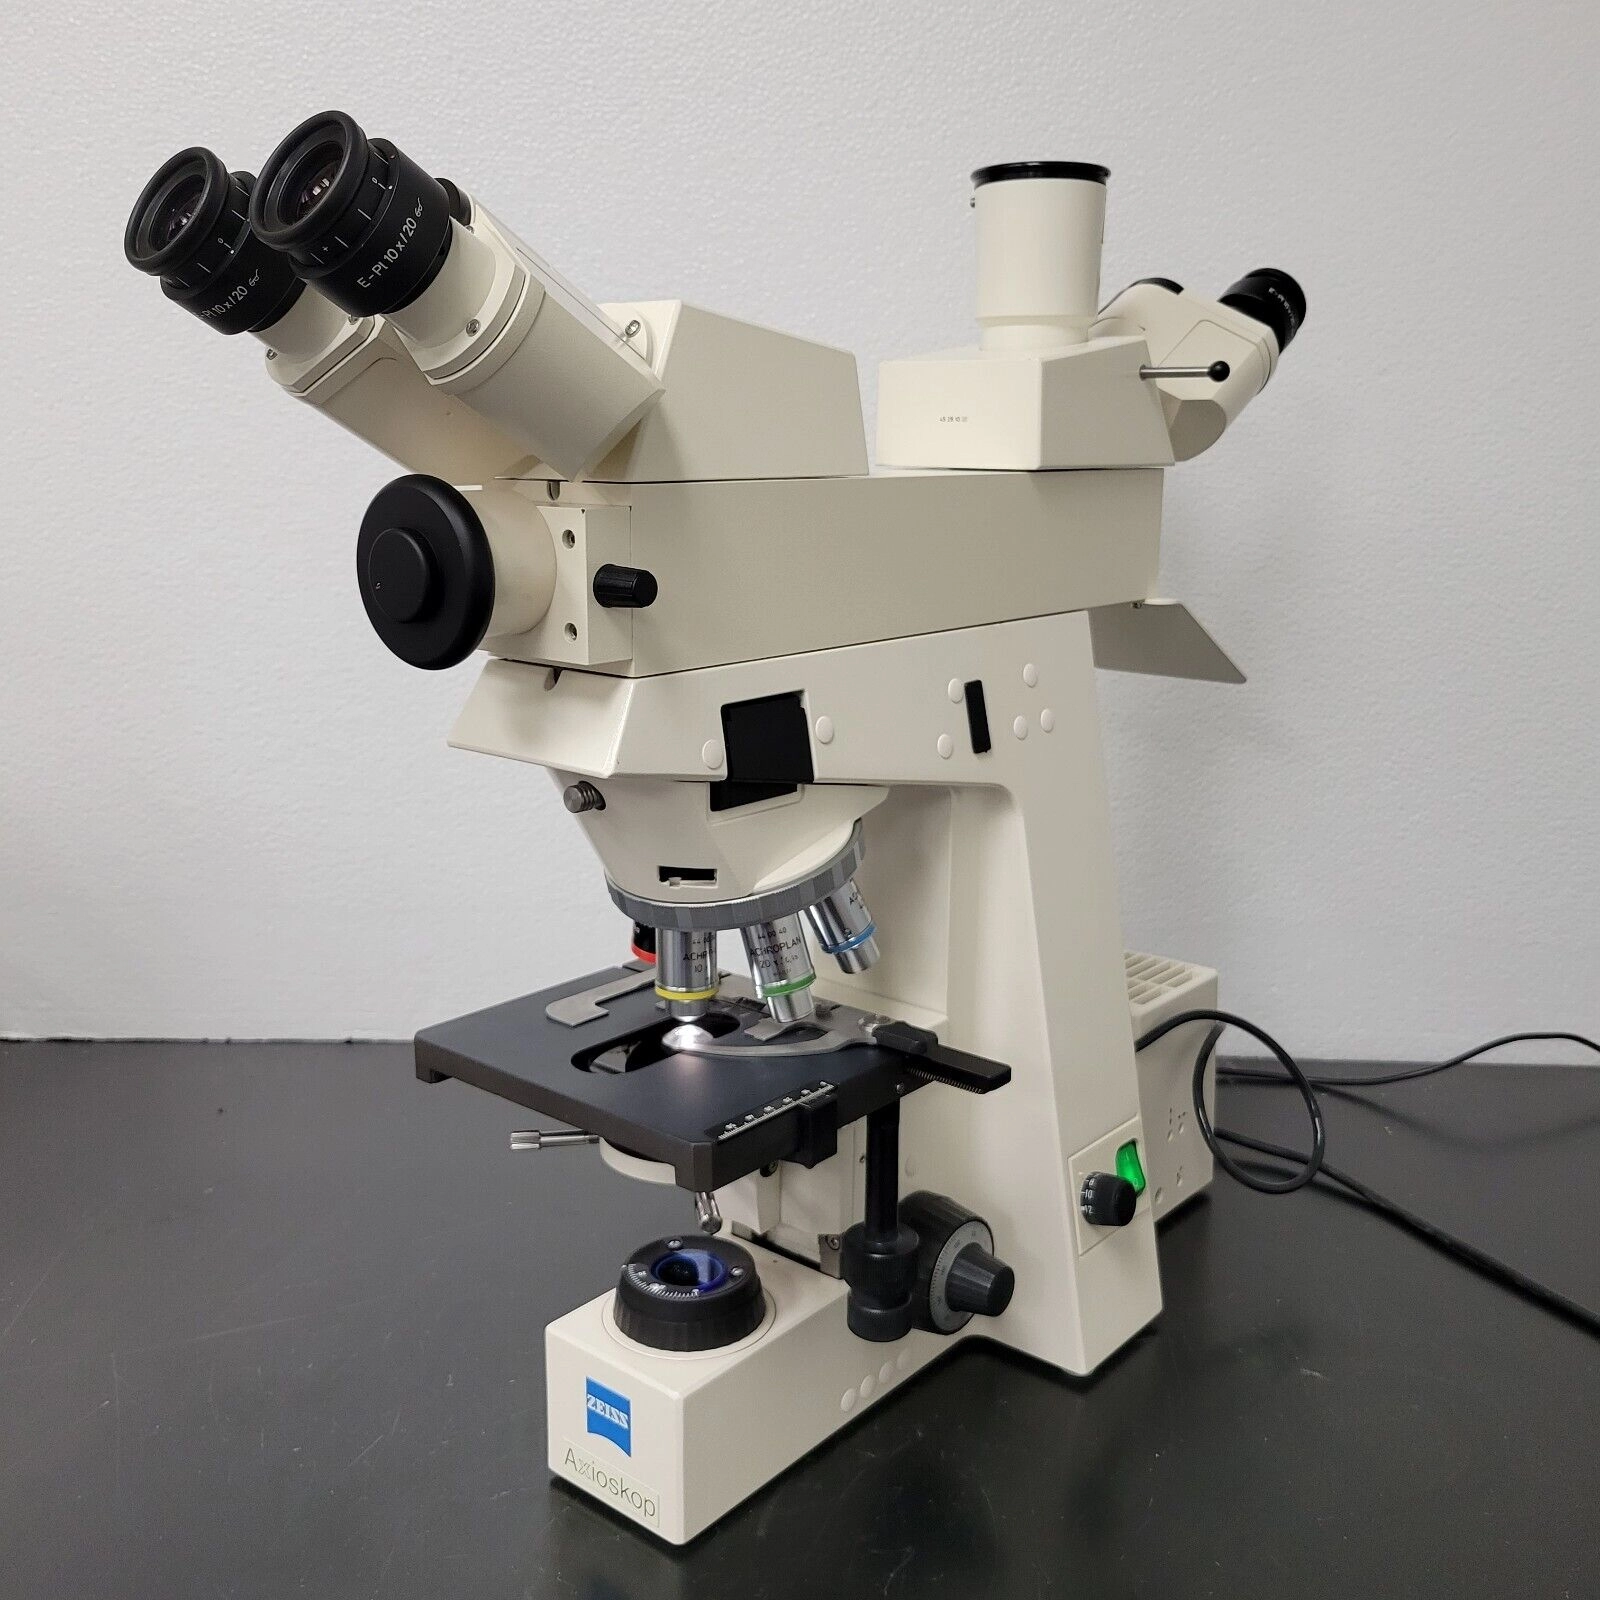 Zeiss Microscope Axioskop with 2.5x and Dual Head Bridge for Pathology